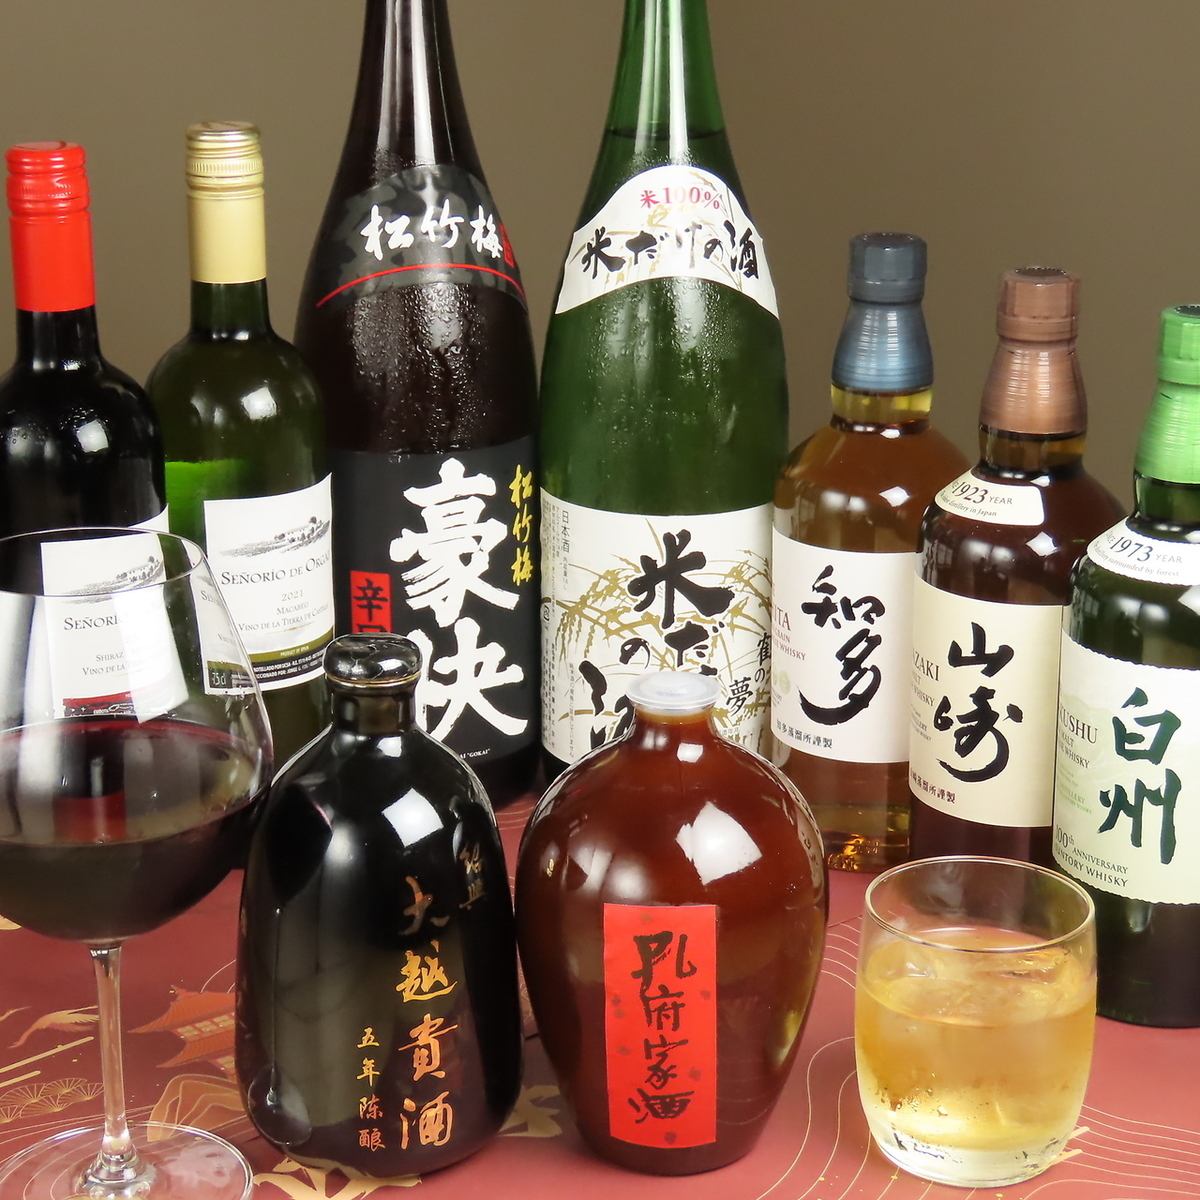 All-you-can-drink for 2,750 yen including tax! Enjoy a wide variety of drinks that go well with your food.